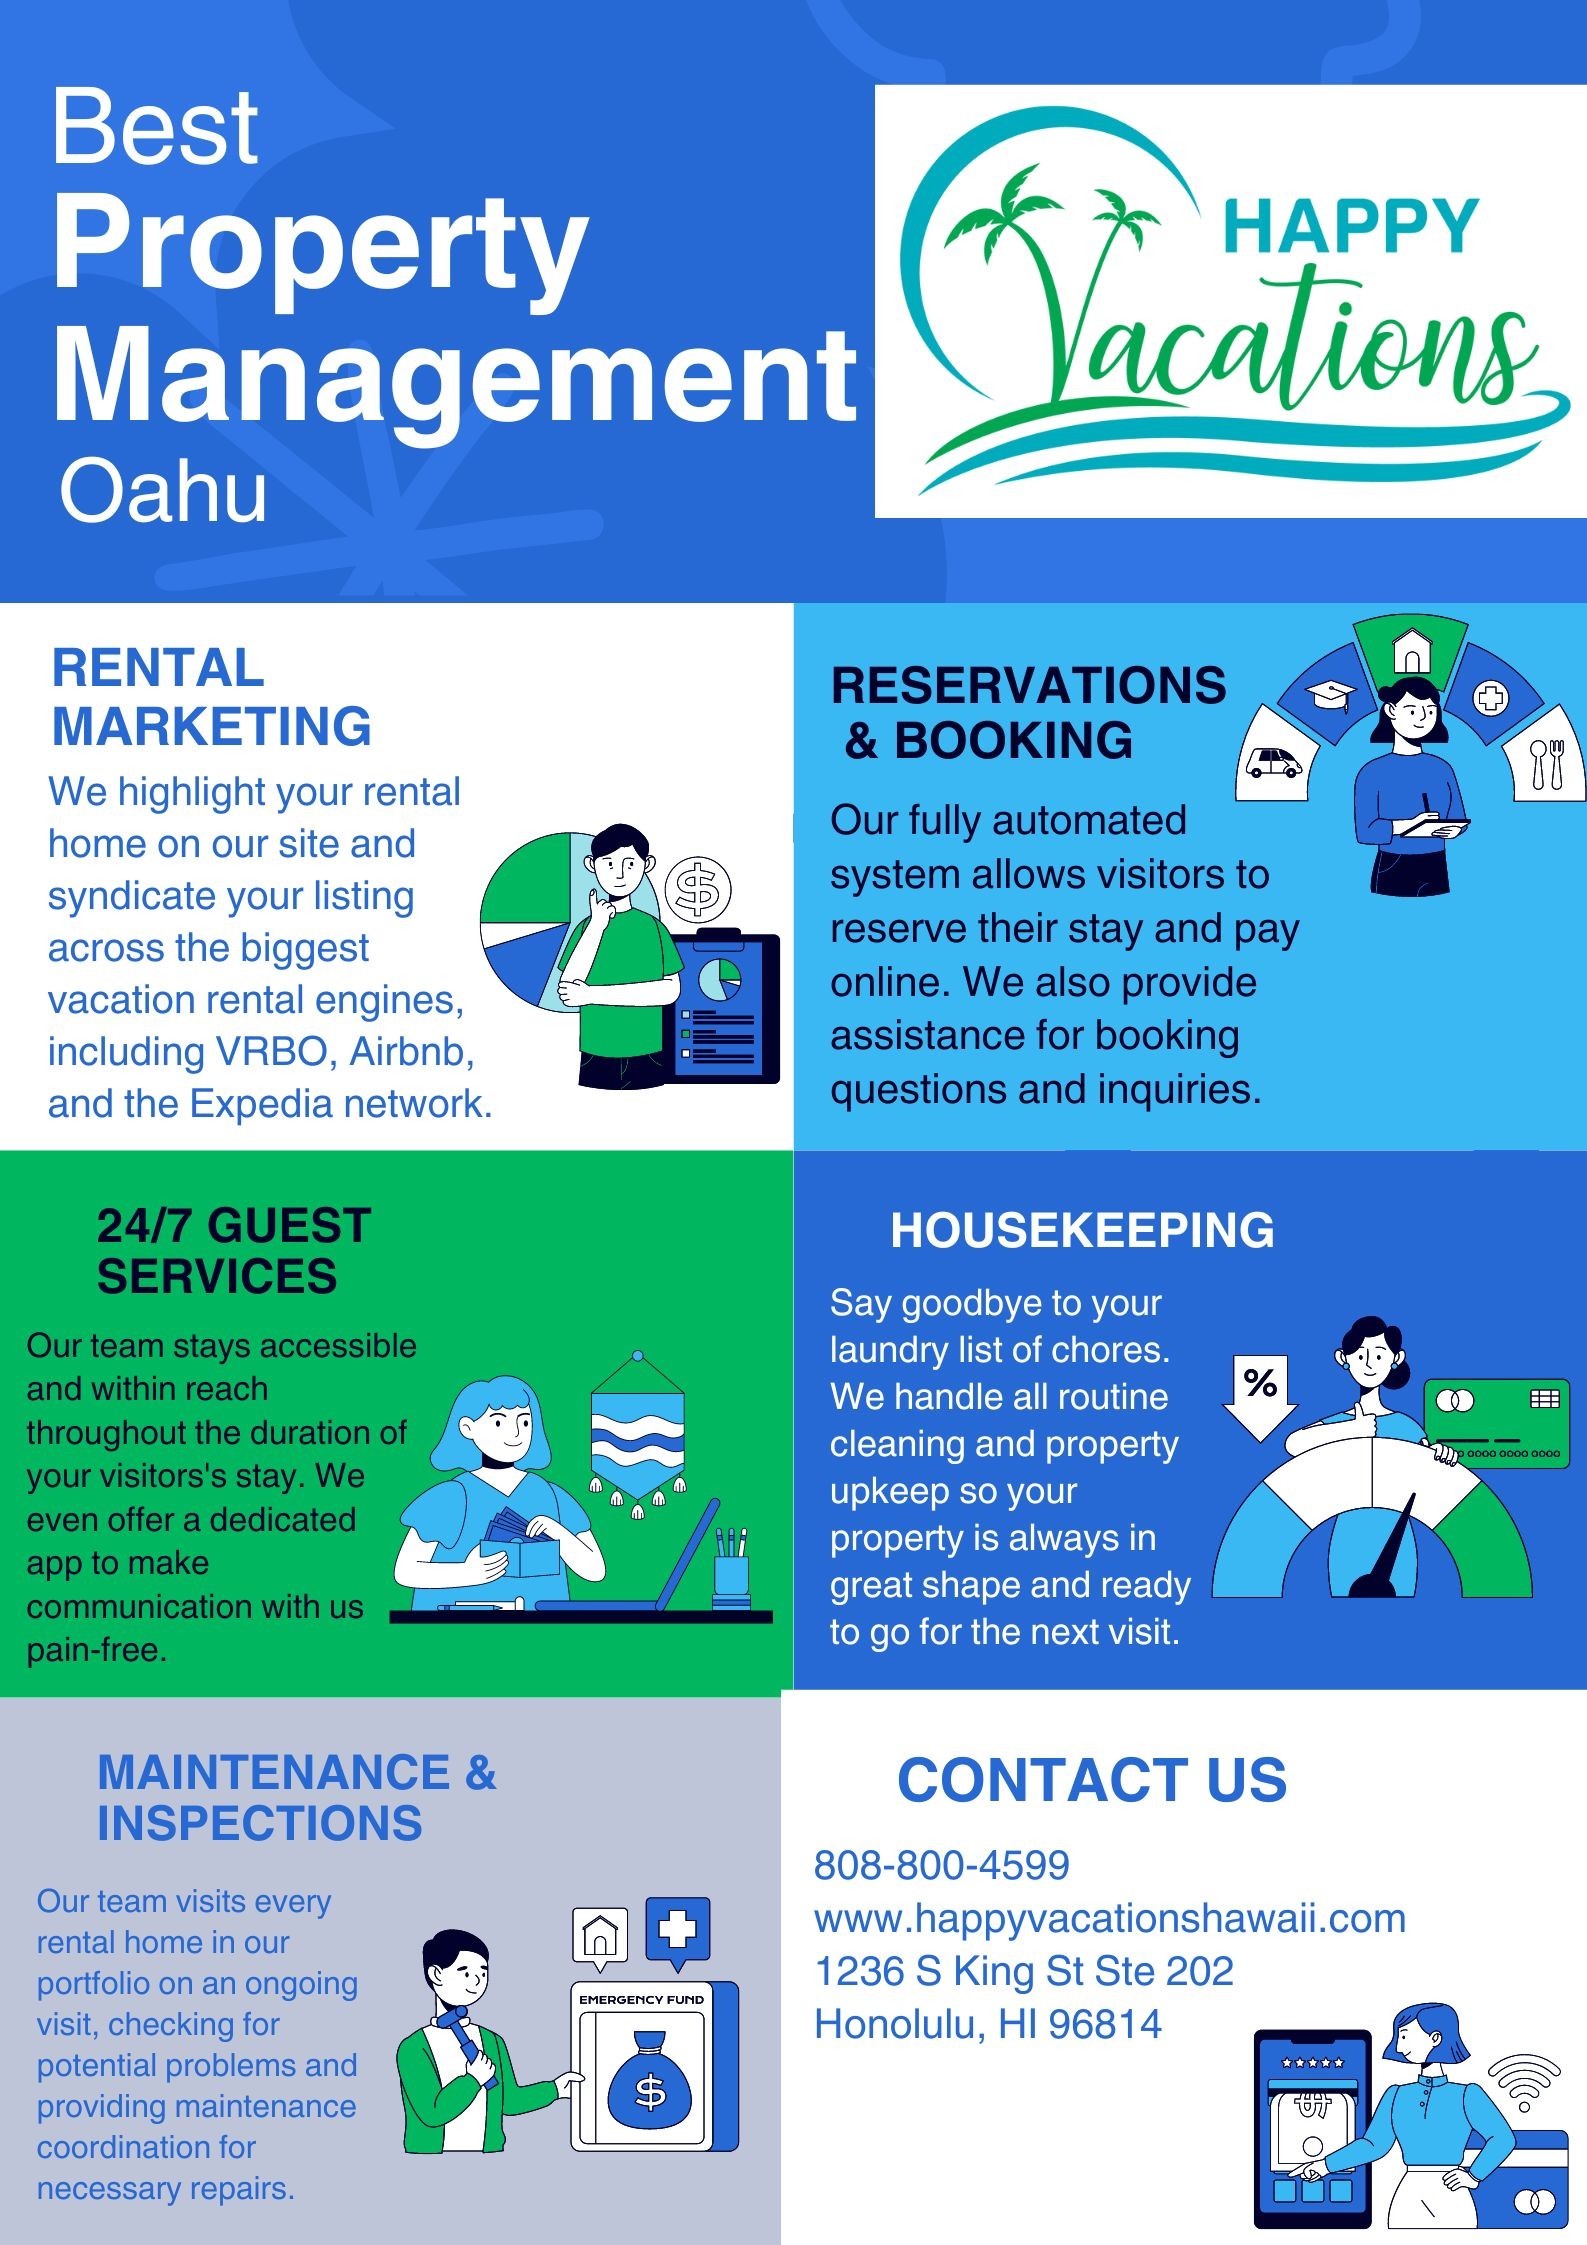 Best Property Management Oahu - Happy Vacations Hawaii